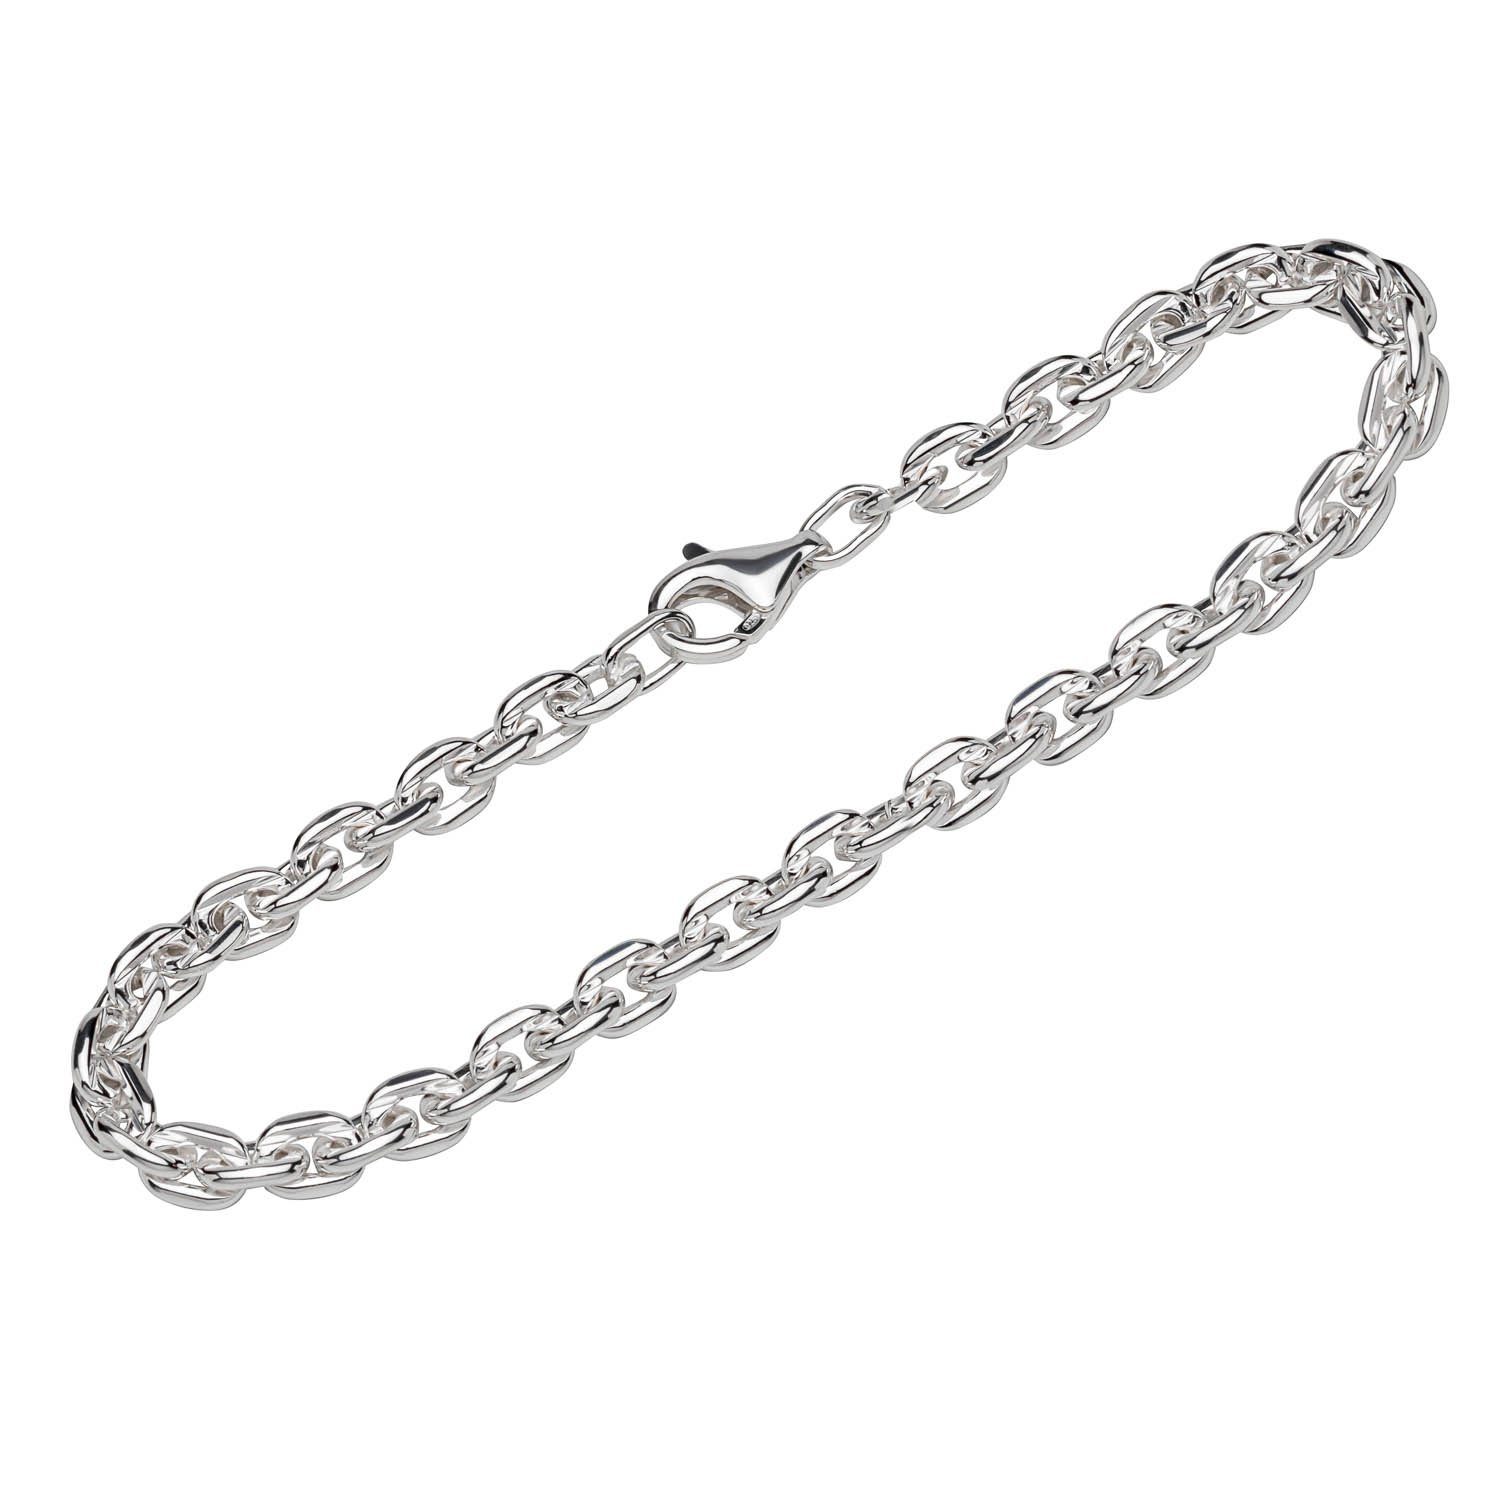 NKlaus Silberarmband Armband 925 Sterling Silber 22cm Ankerkette flach (1 Stück), Made in Germany